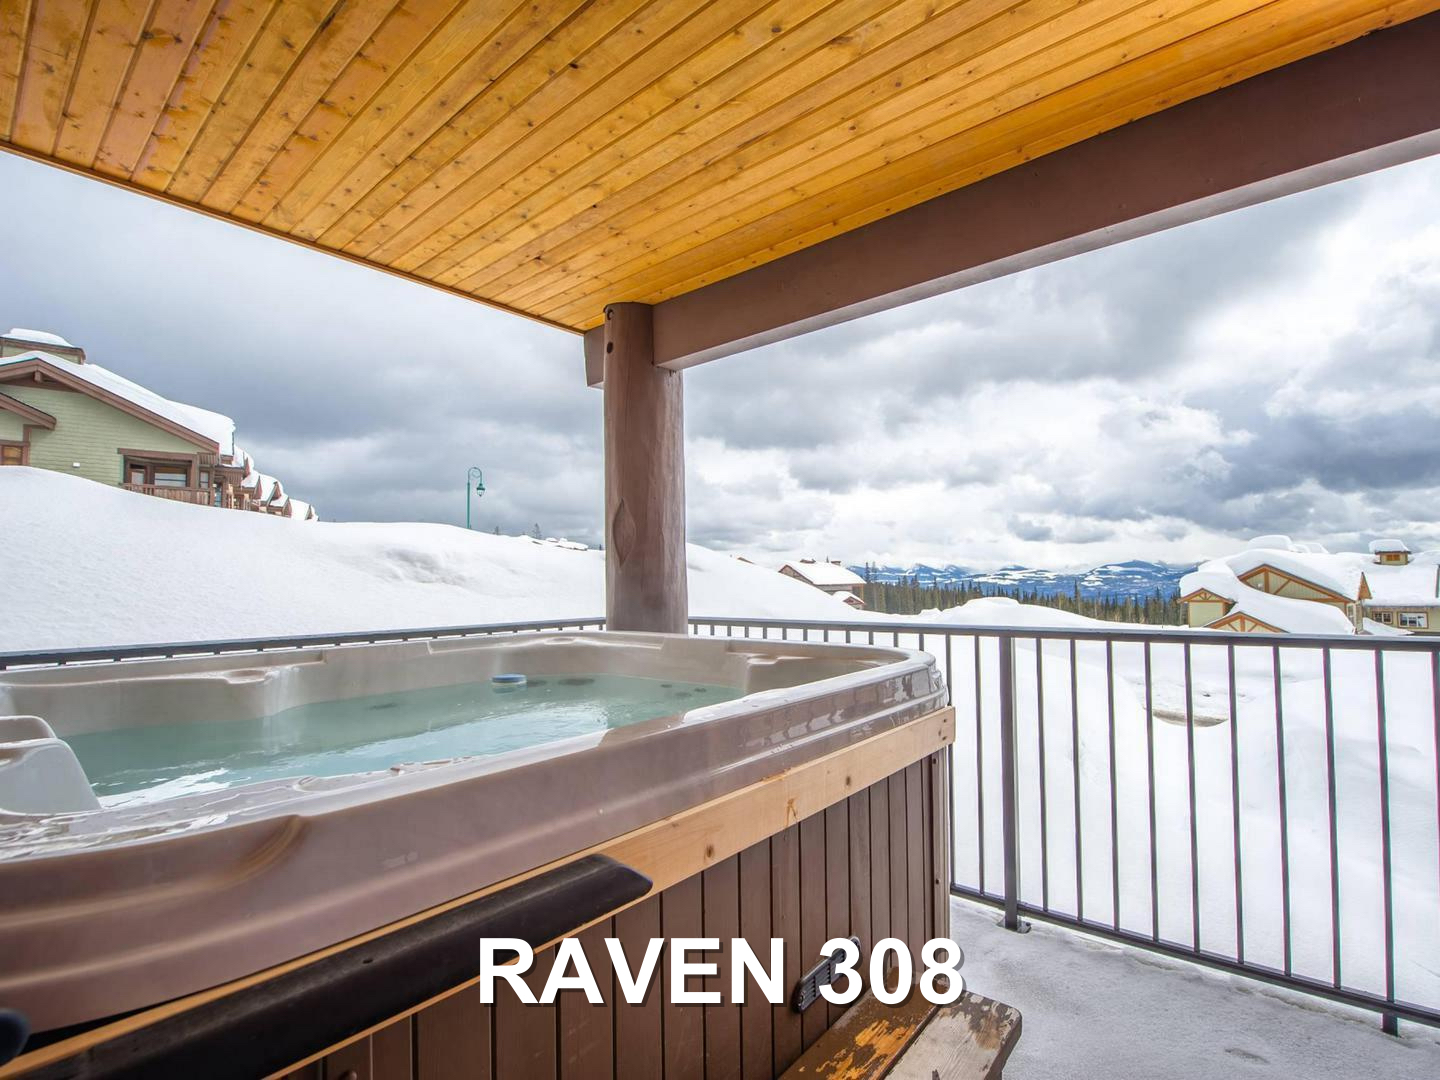 The Raven 308 private deck with the private hot tub overlooking a snowy landscape, located at Big White Ski Resort and managed by Luxury Mountain Vacation Rentals.